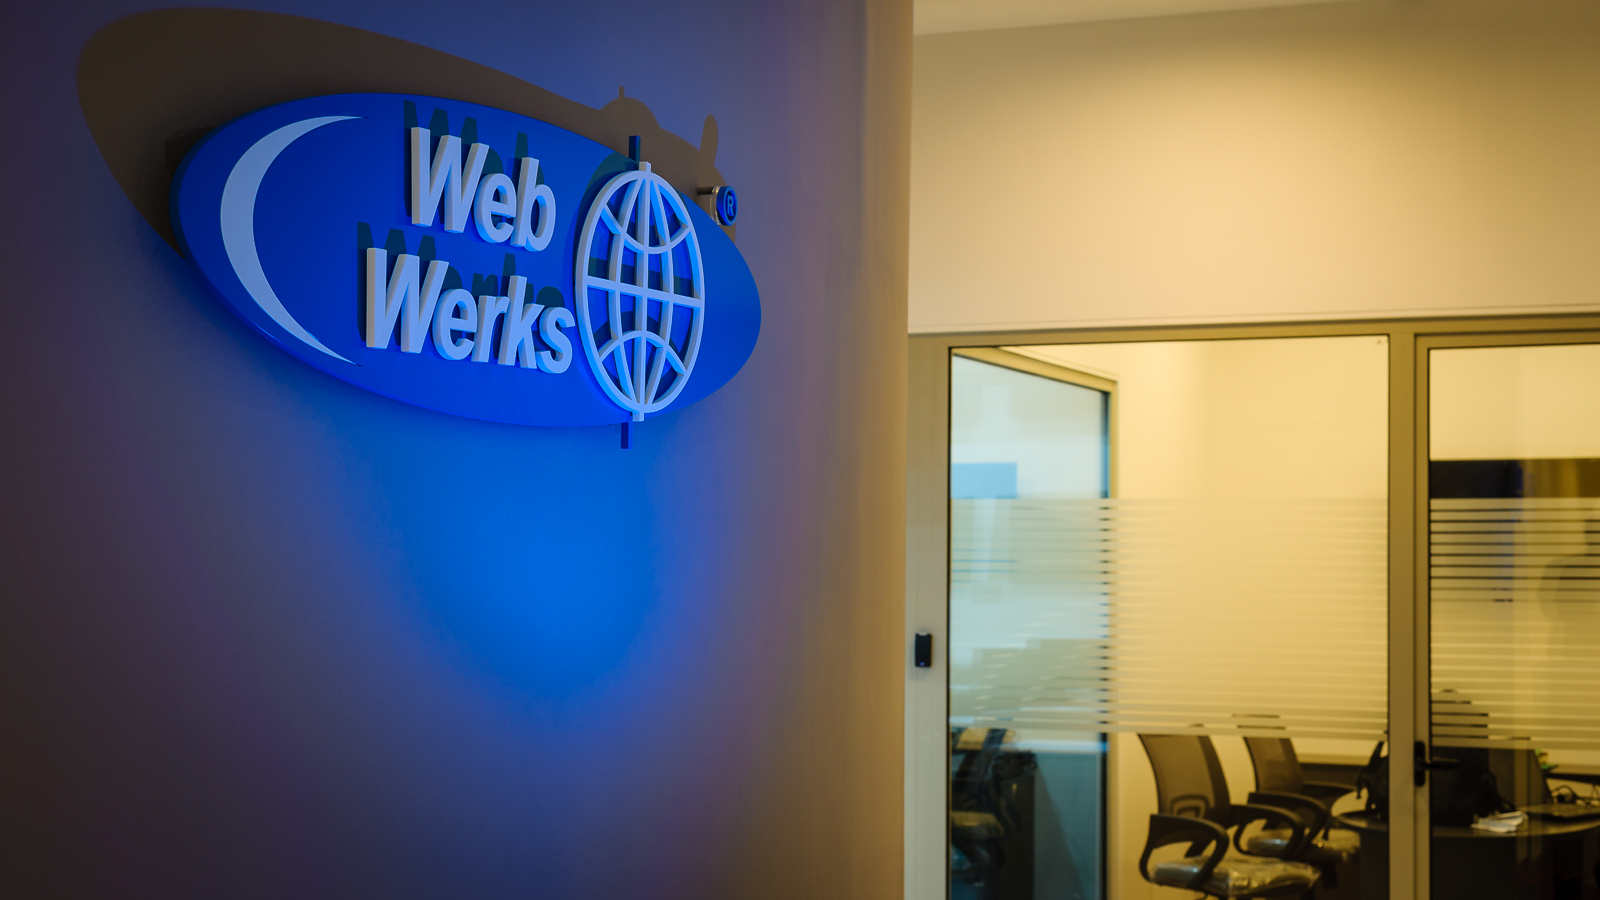 Web Werks installs Google Cache Servers to improve Internet Experience for Indian Customers